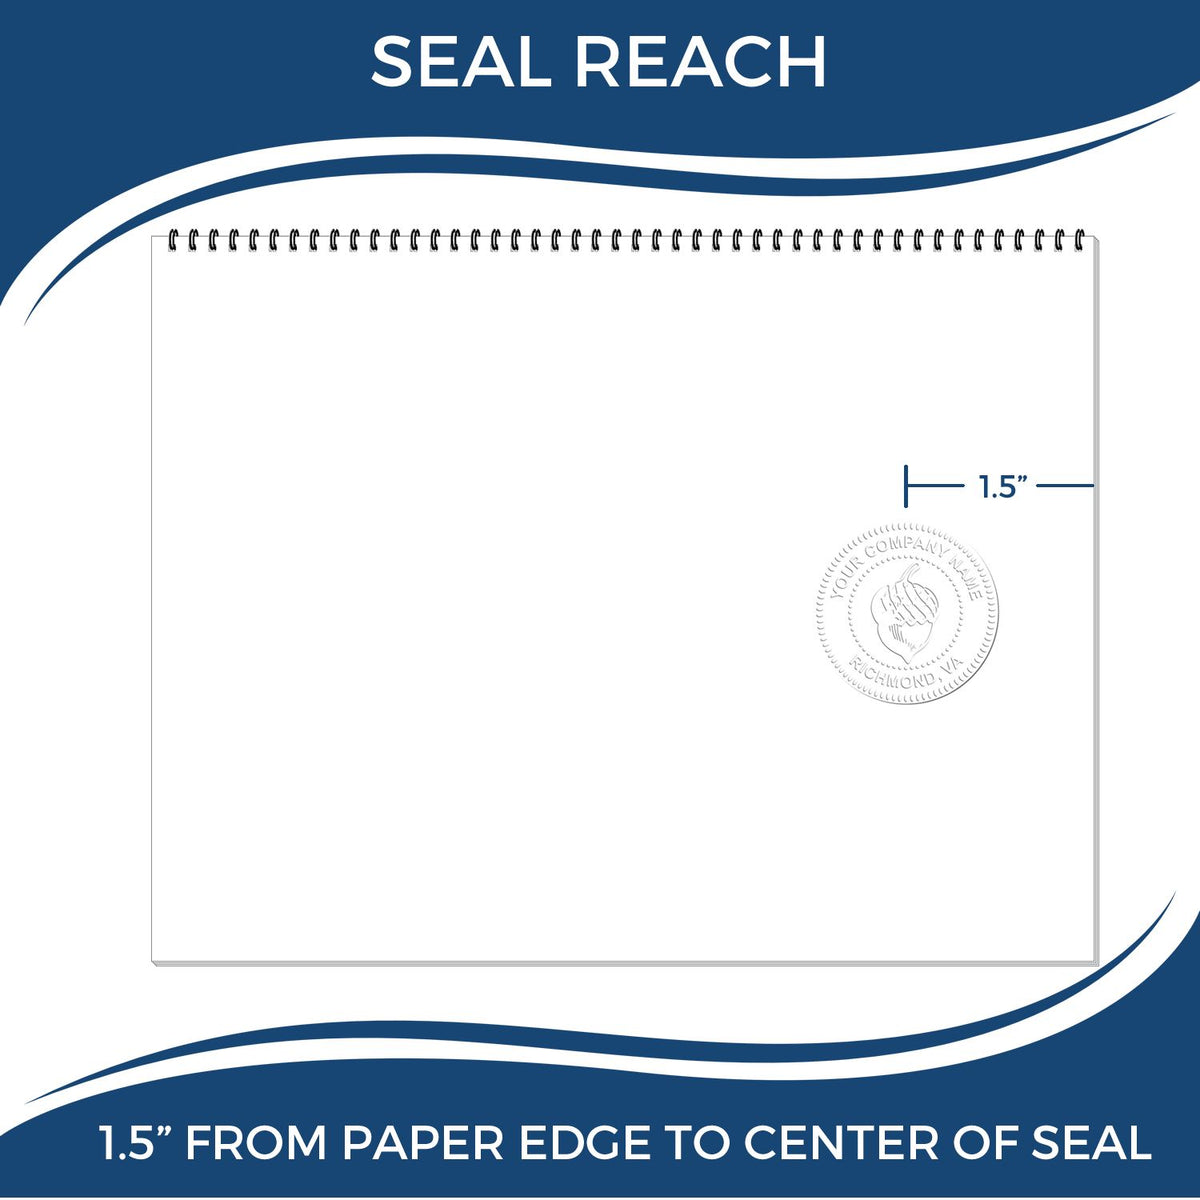 An infographic showing the seal reach which is represented by a ruler and a miniature seal image of the Hybrid New Jersey Land Surveyor Seal